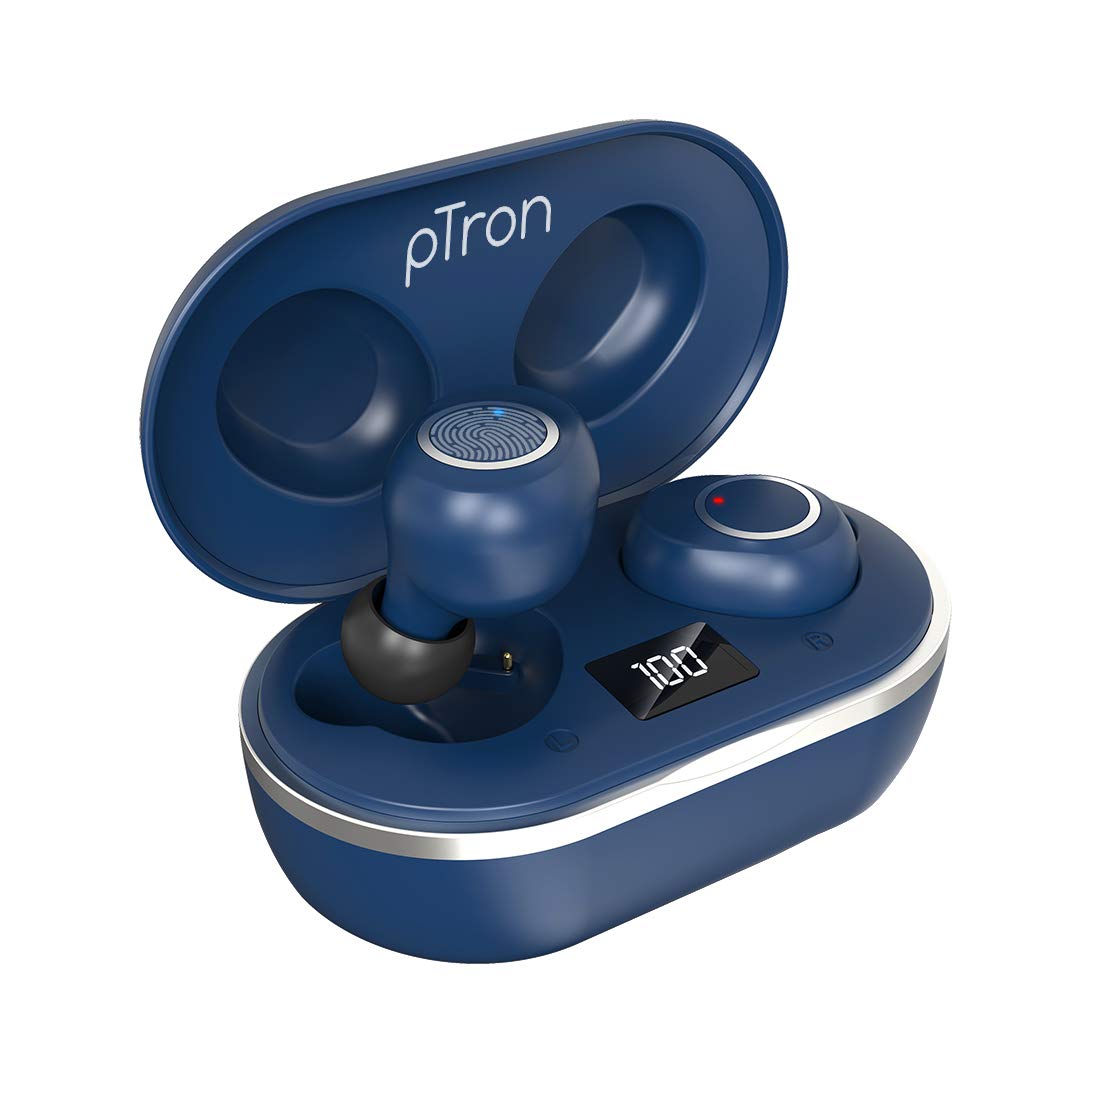 here's i am review all best ptron earphone wired and wireless headphones for all budget users, 
so before we review earbuds let me explain what kind of thing check  in ptron(earphone/headphones)